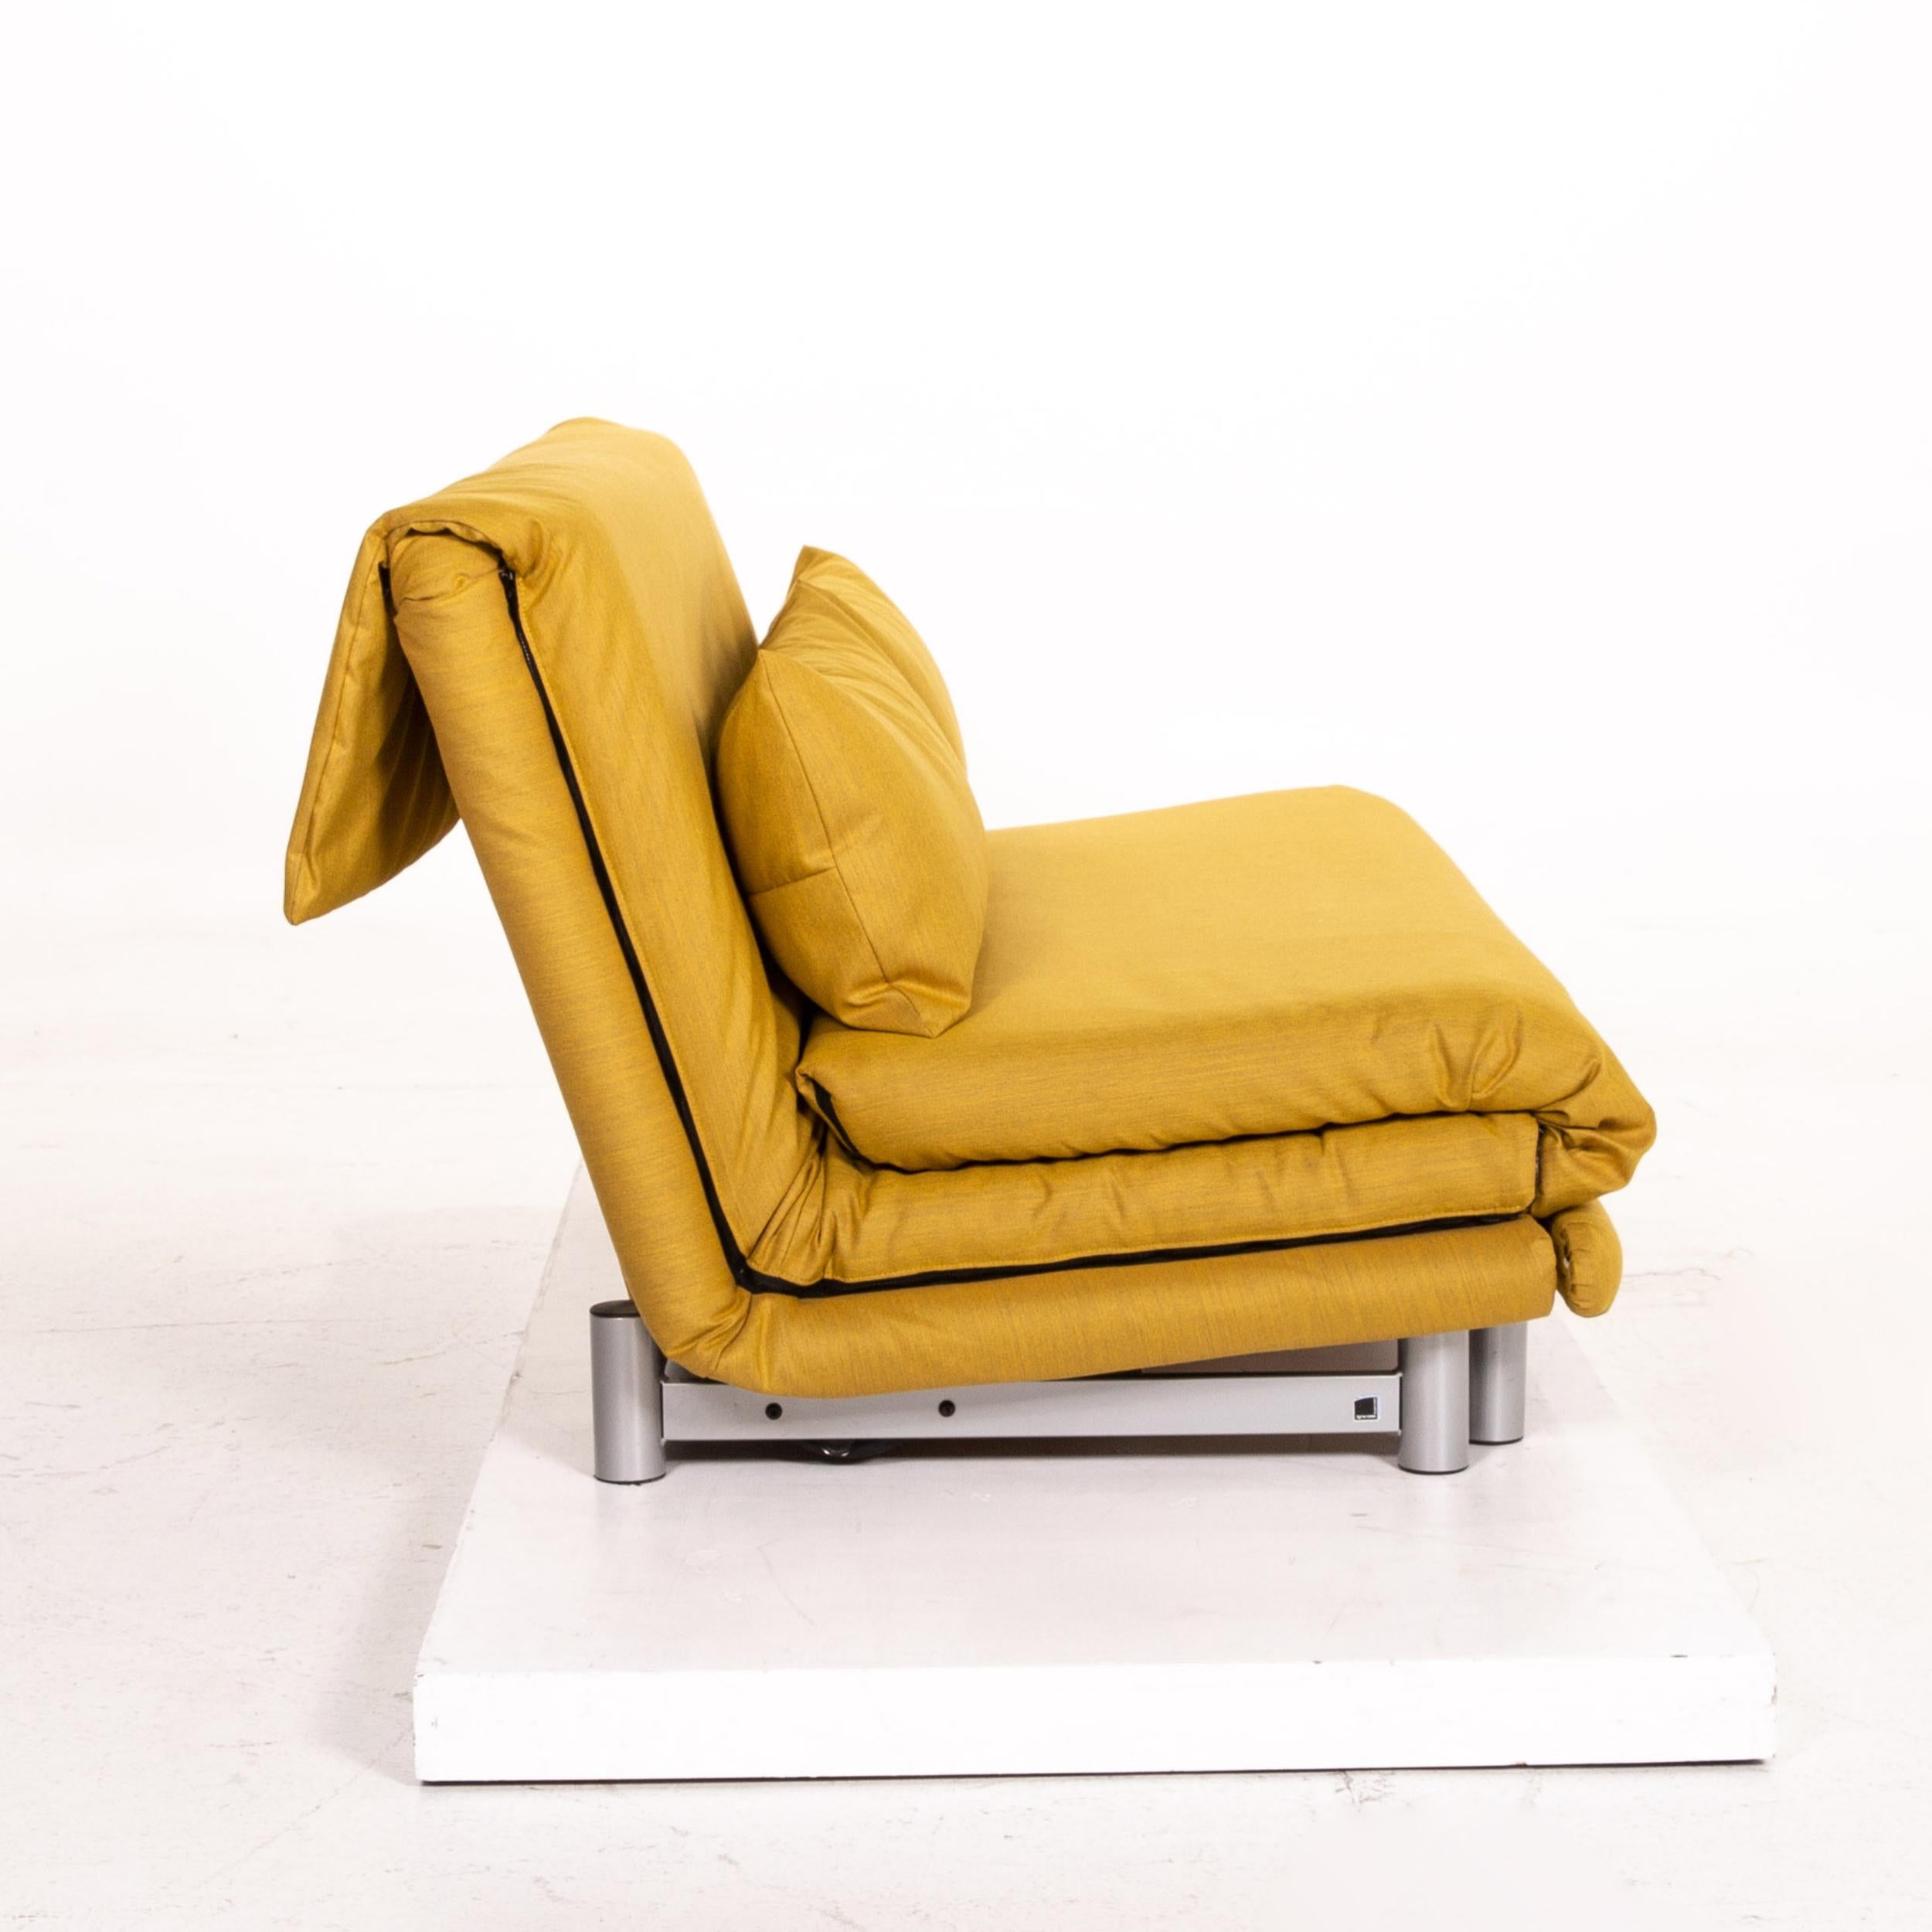 Ligne Roset Multy Fabric Sofa Bed Yellow Two-Seat Sofa Sleep Function Couch 1